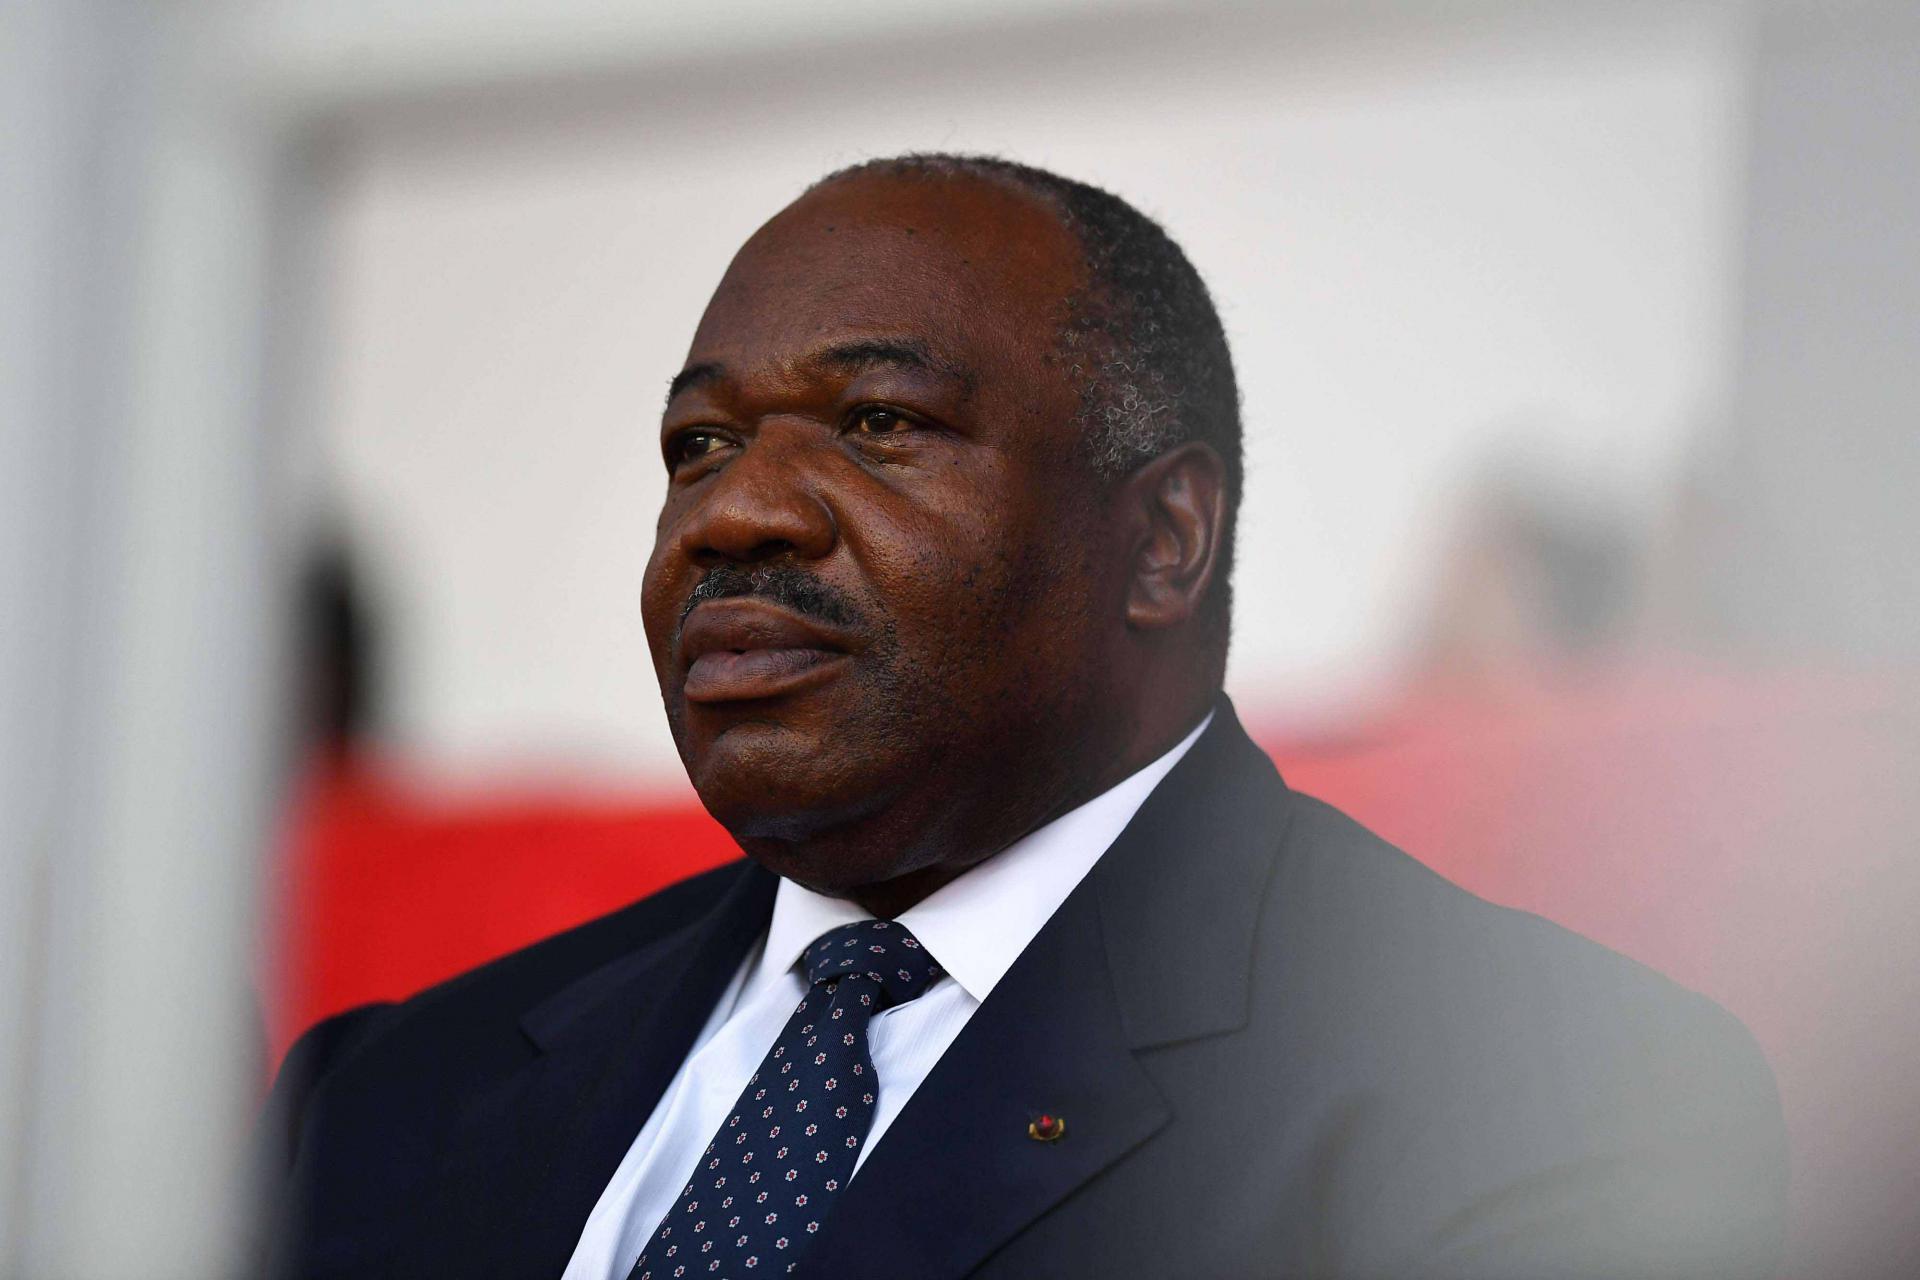 After an extended period of silence, the Gabonese presidency eventually admitted Bongo was "seriously ill" and had undergone surgery